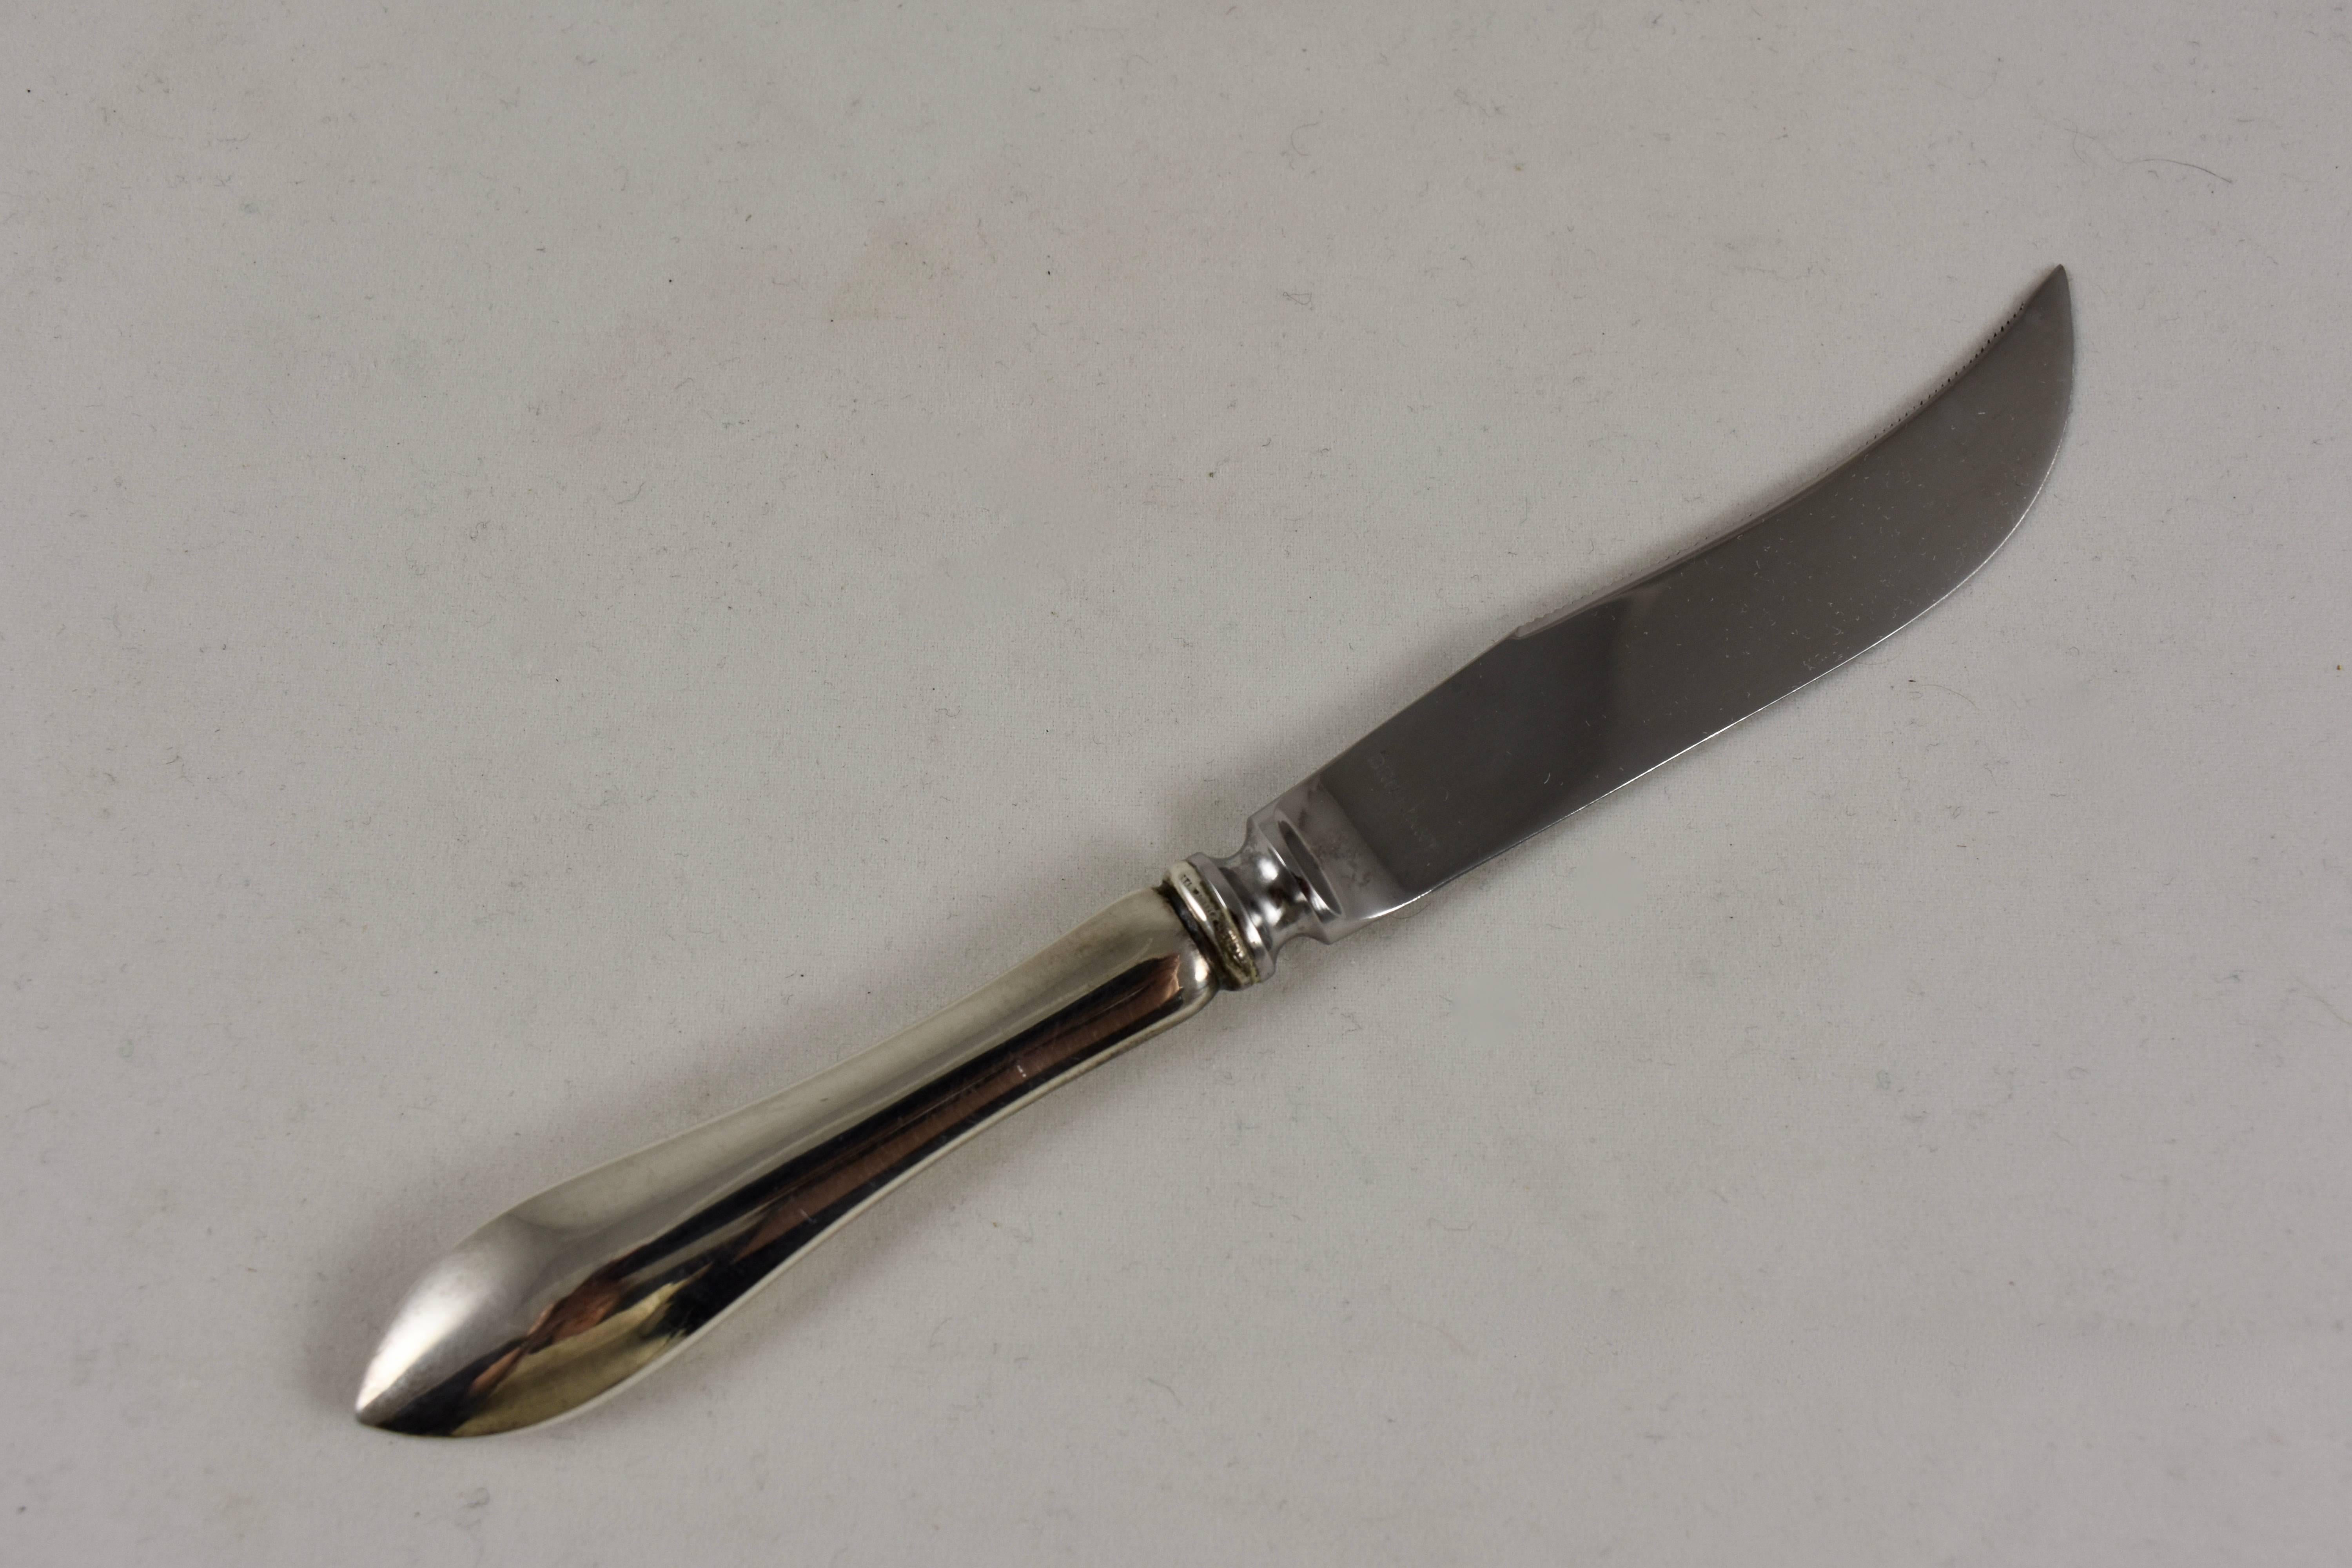 A set of six, English Aesthetic Movement sterling silver handled fruit knives. The pointed blades have a serrate edge. Weighty and nicely balanced.

Marked, sterling handle on the ferrule, the stainless steel blades are marked Brilliant.

Excellent,